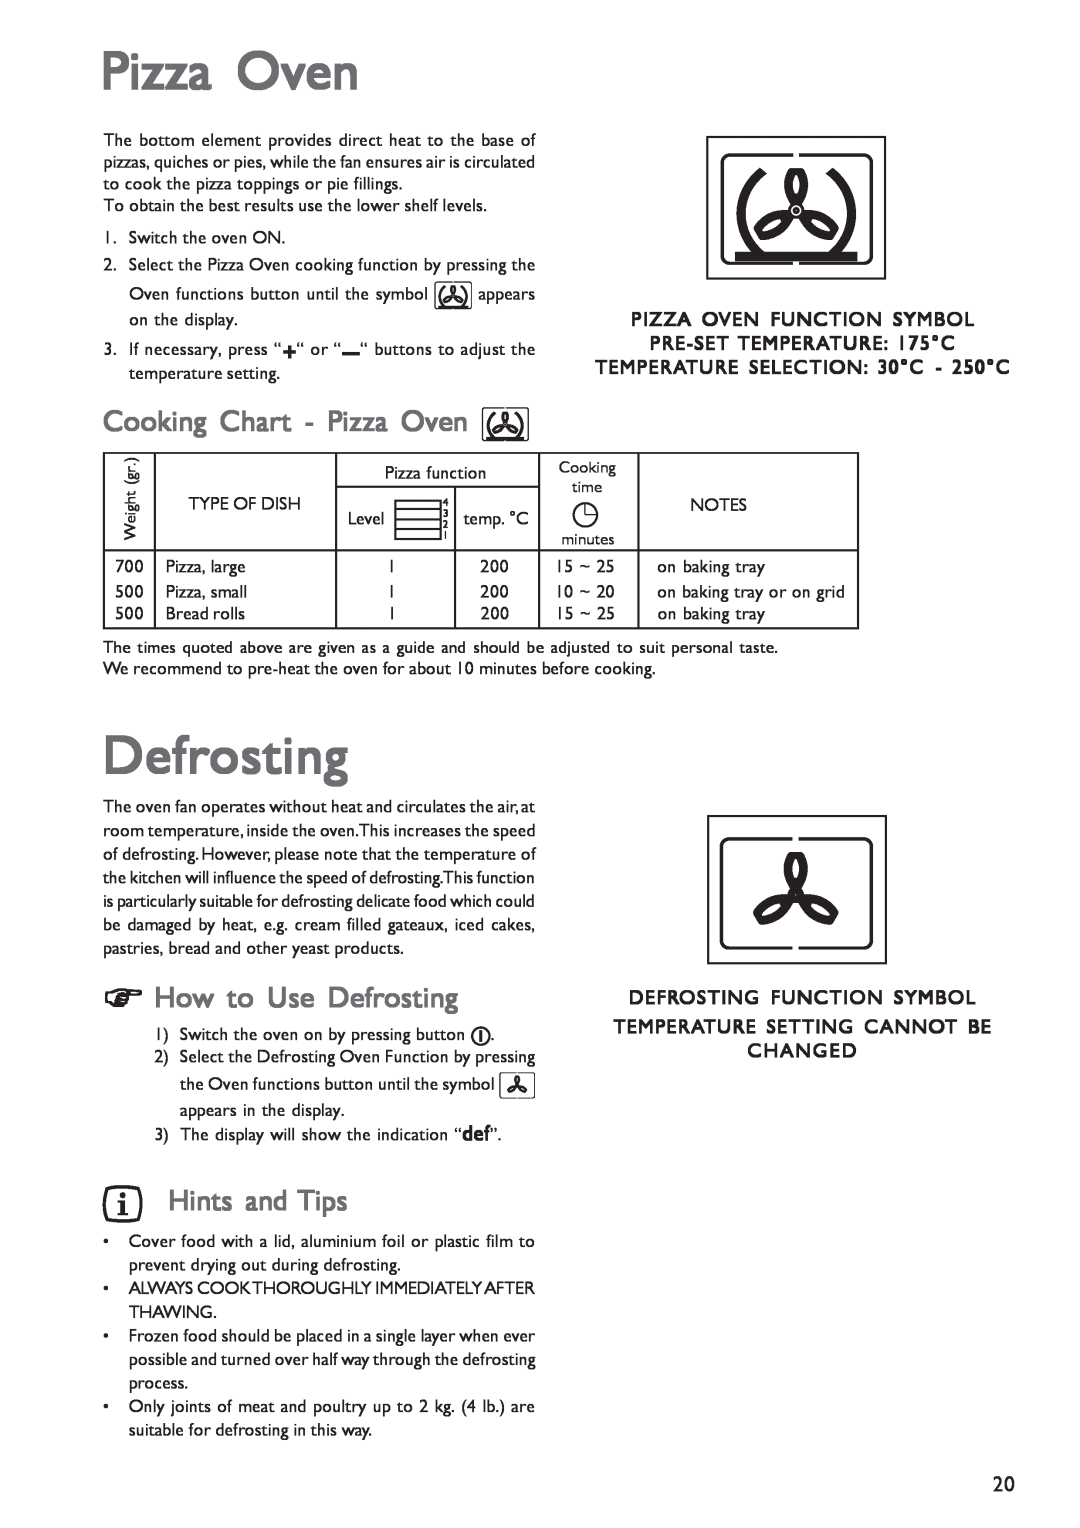 John Lewis JLBIOS603 Cooking Chart - Pizza Oven, How to Use Defrosting, Hints and Tips, Pizza Oven Function Symbol 